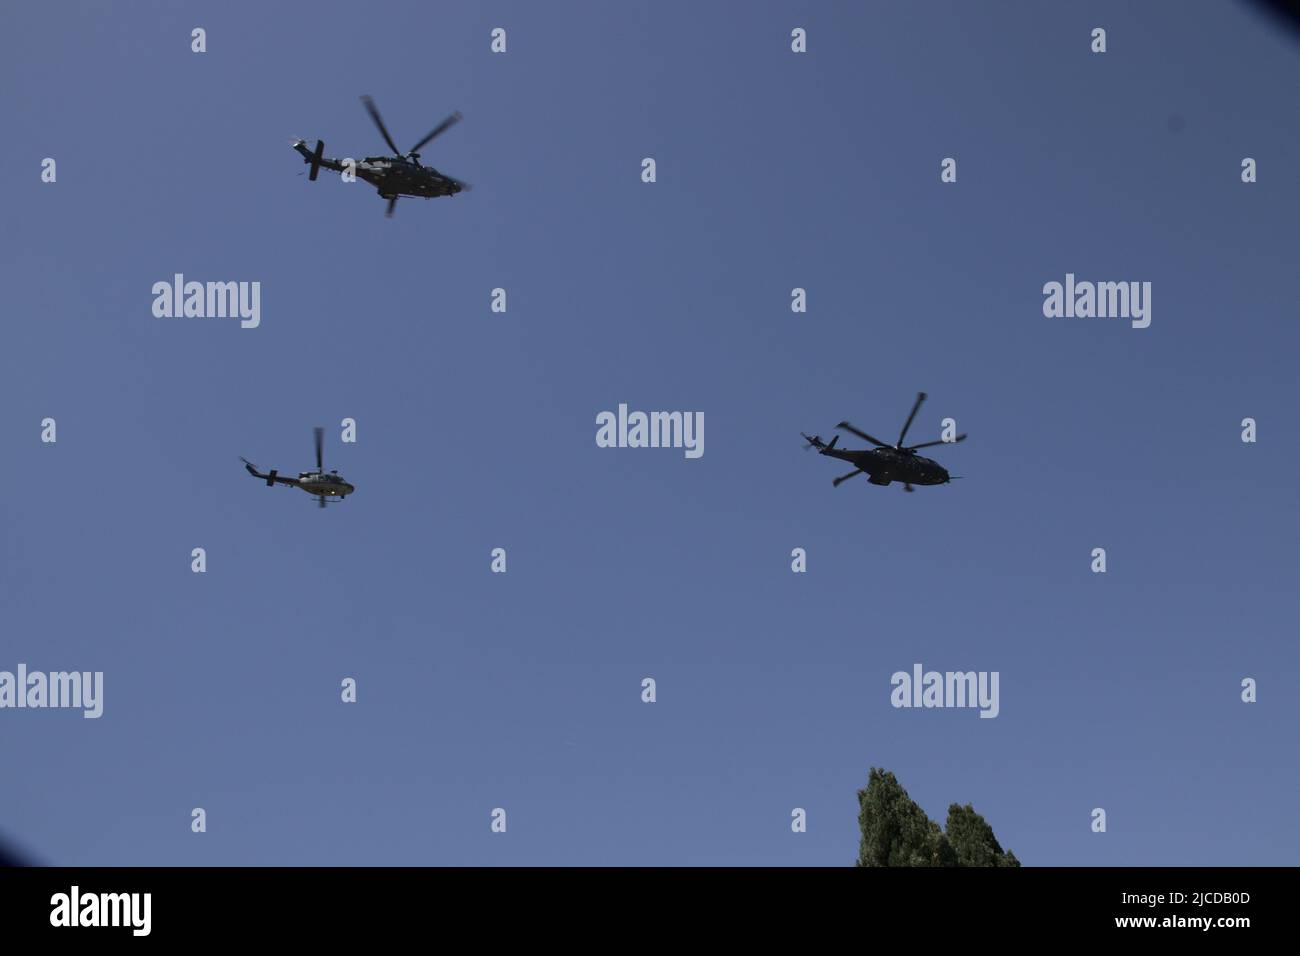 Italian military parade on 2 June. Group of helicopters flies over the Colosseum. Stock Photo